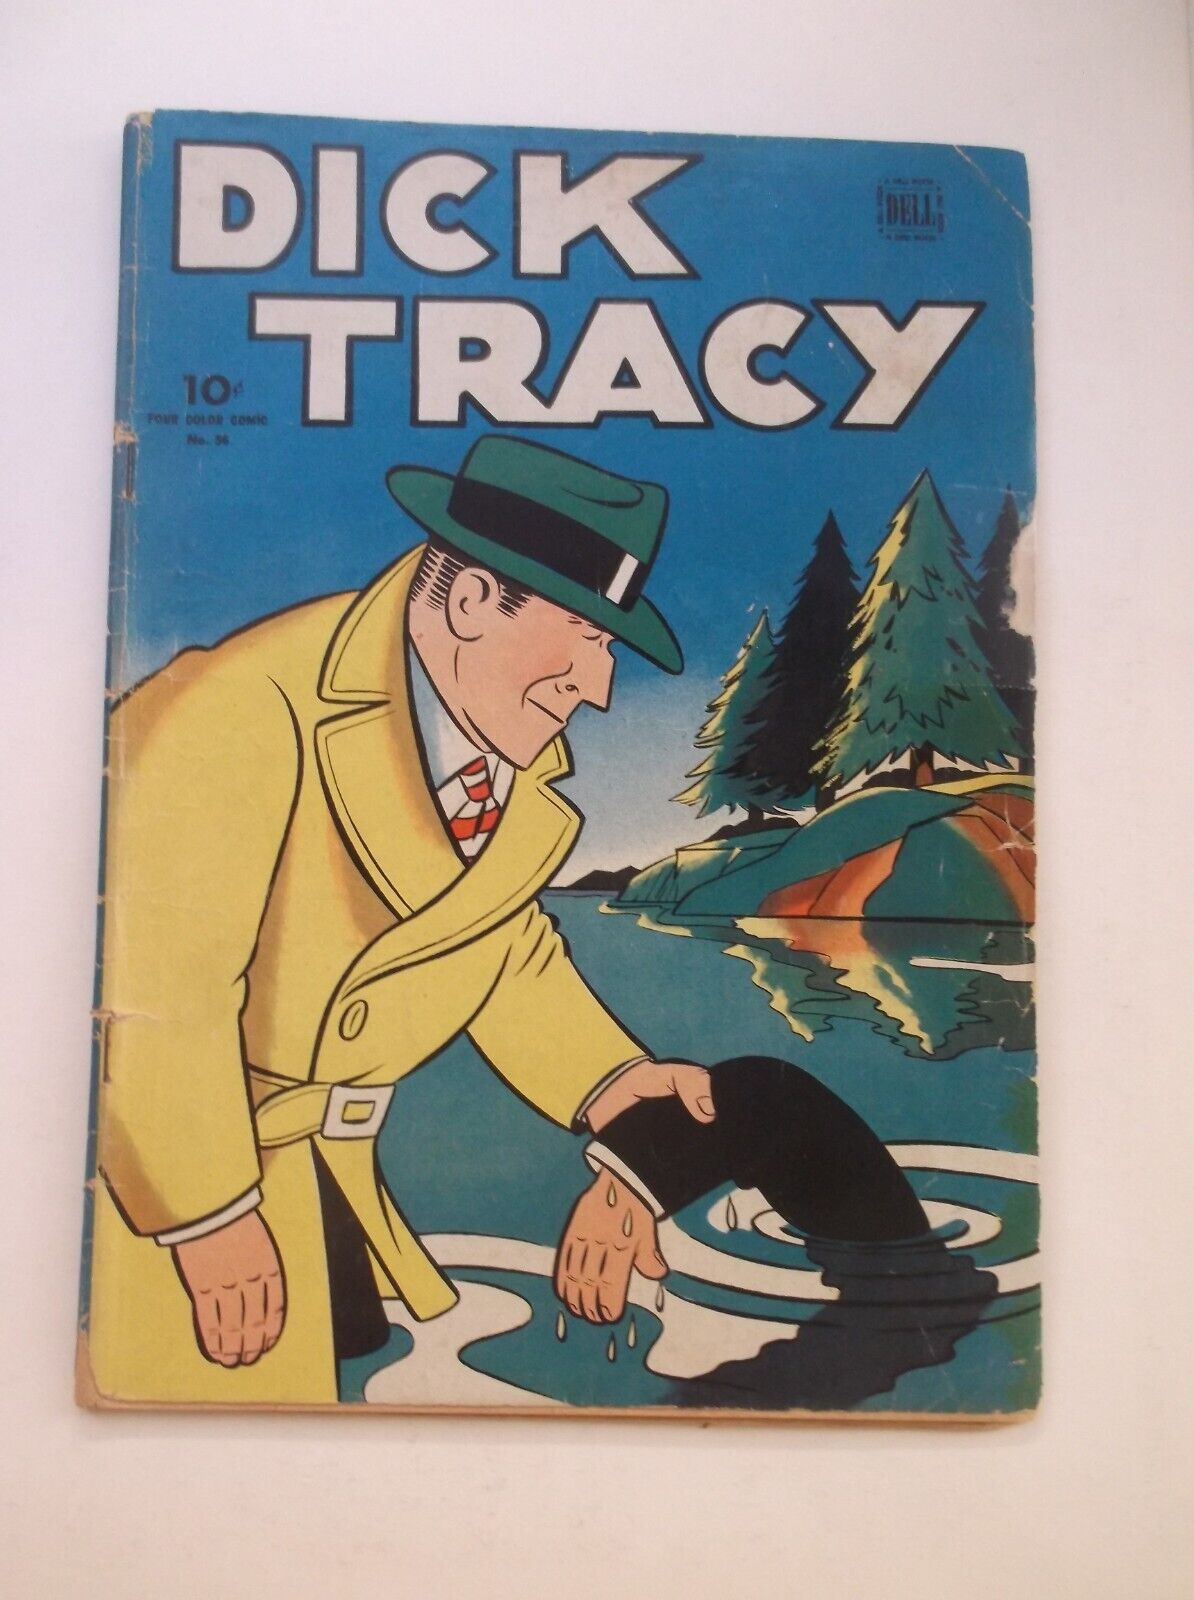 DELL PUBLISHING CO.: FOUR COLOR, DICK TRACY #56, RARE/HTF EARLY GA, 1944, GD+